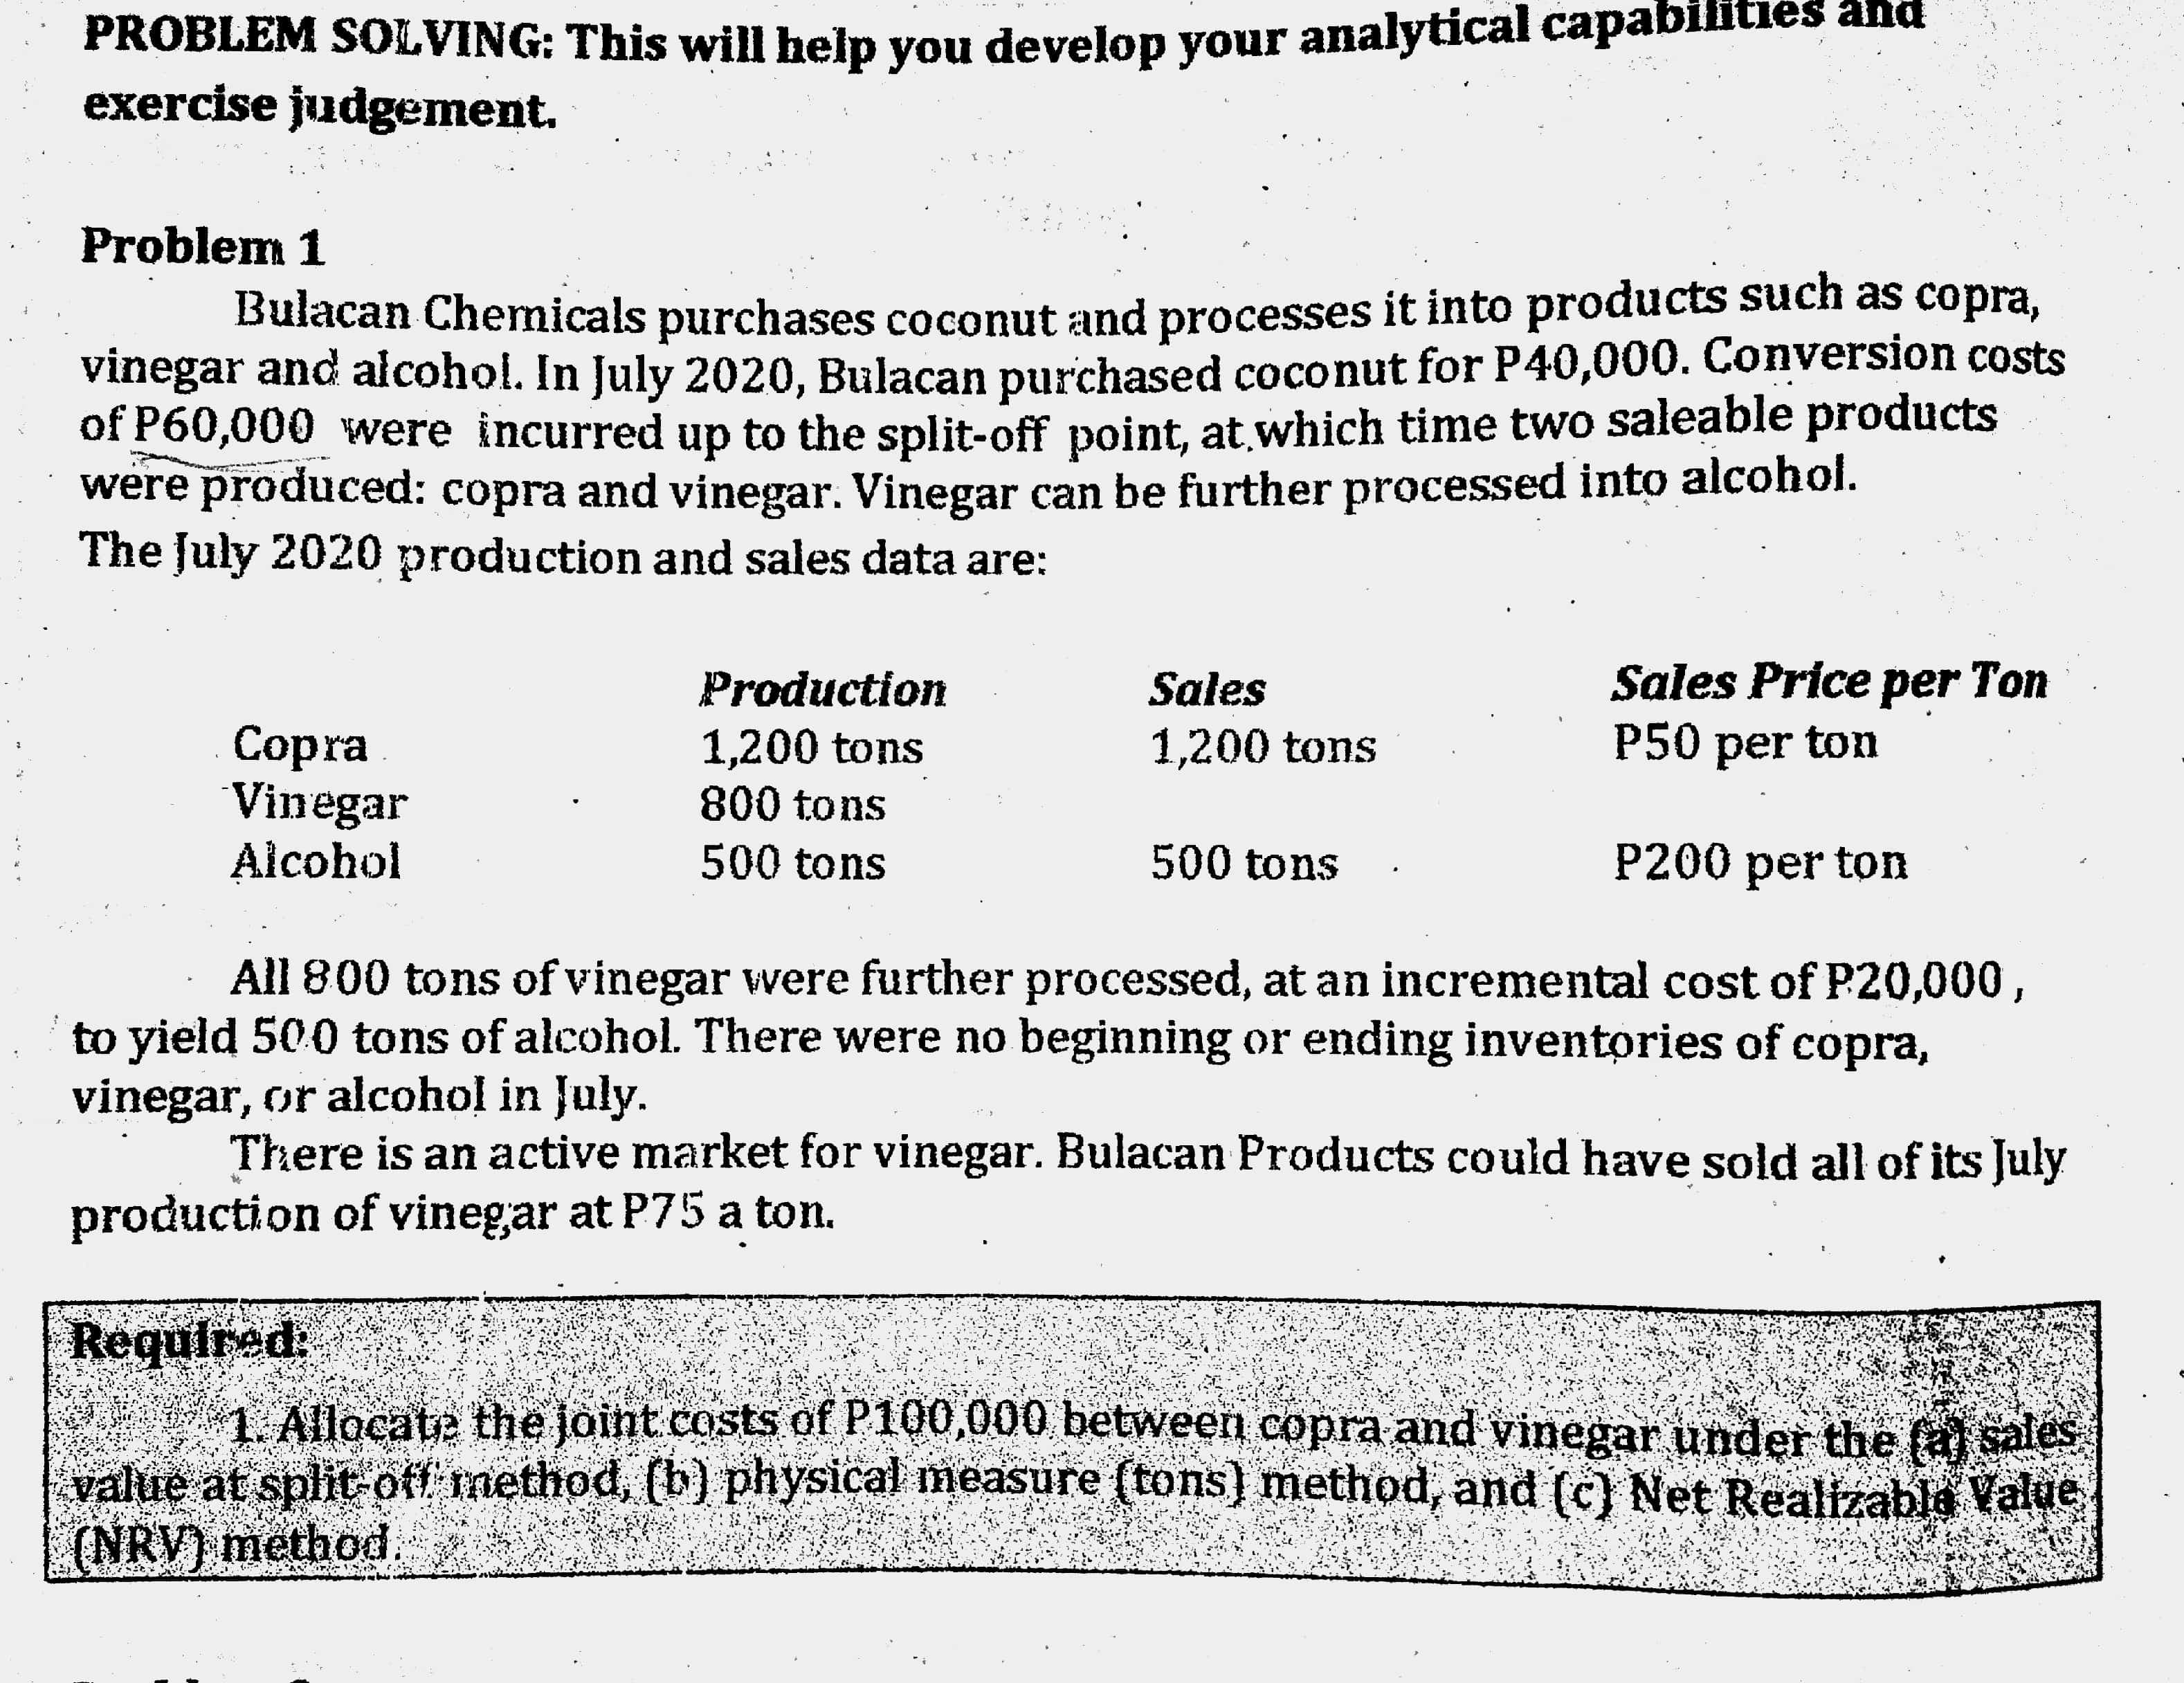 PROBLEM SOLVING: This will help you develop your analytical capabinles and
exercise judgement.
Problem 1
Bulacan Chemicals purchases coconut and processes it into products such as copra,
vinegar and alcohol. In July 2020, Bulacan purchased coconut for P40,000. Conversion costs
of P60,000 were incurred up to the split-off point, at which time two saleable products
were produced: copra and vinegar. Vinegar can be further processed into alcohol.
The July 2020 production and sales data are:
Sales Price per Ton
P50 per ton
Production
Sales
Copra
Vinegar
Alcohol
1,200 tons
800 tons
1,200 tons
500 tons
500 tons
P200 per ton
